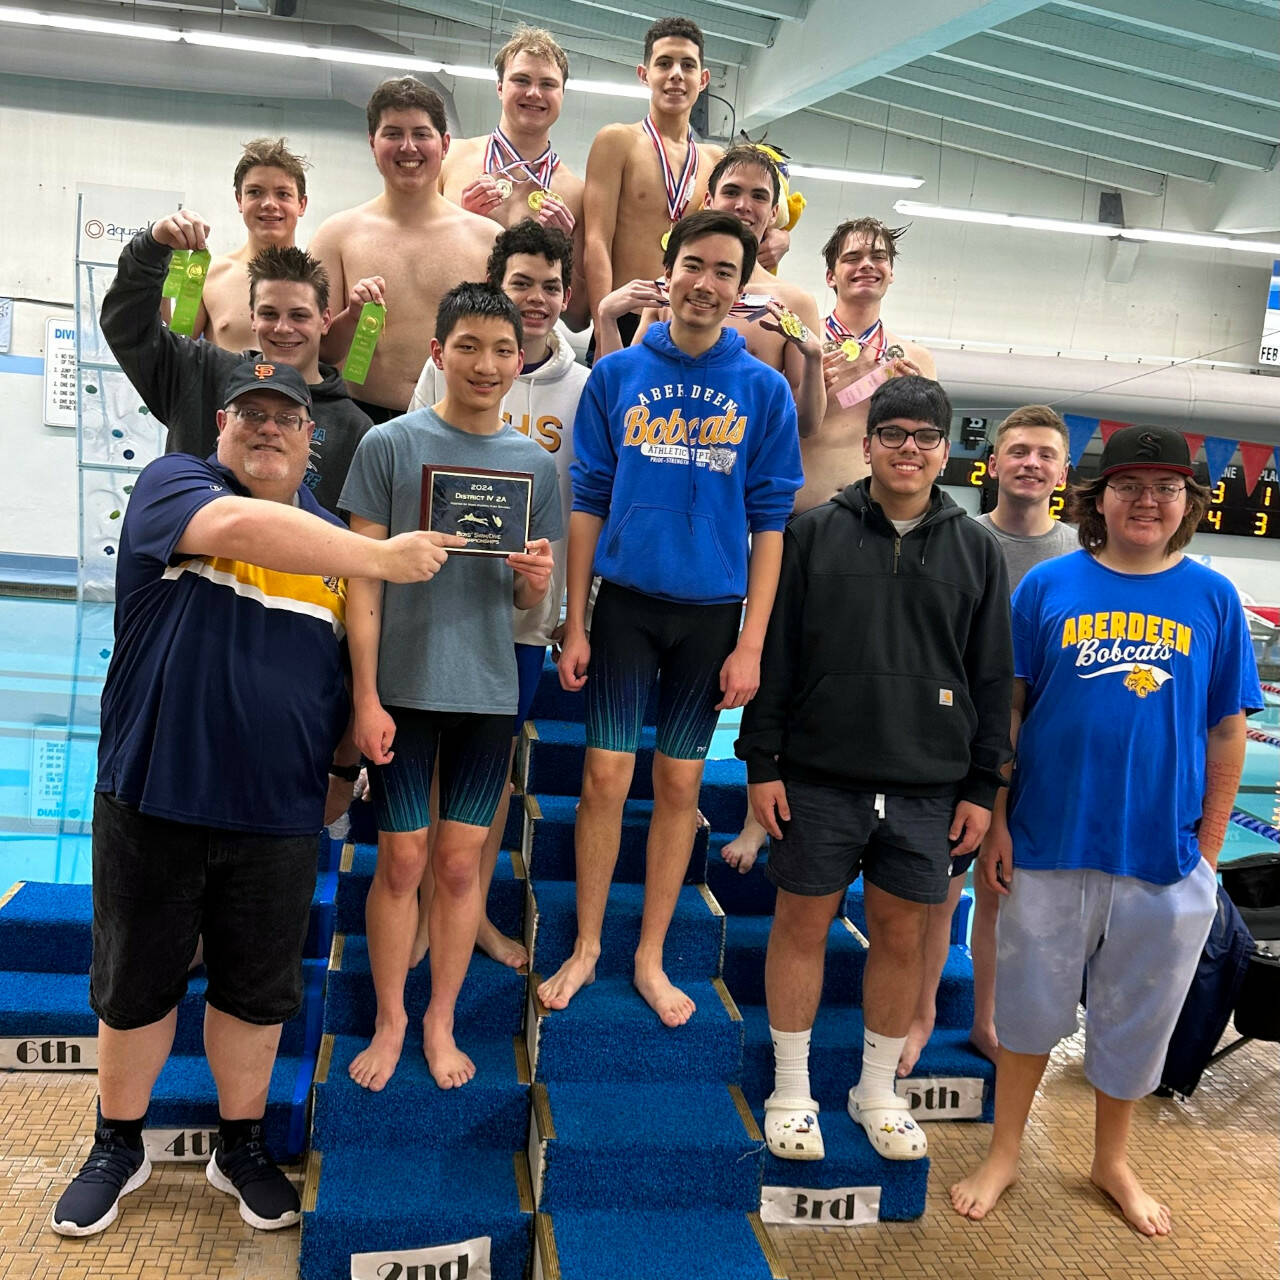 SUBMITTED PHOTO The Aberdeen High School boys swim and dive team won the team title at the 2A District 4 Championships on Saturday at Mark Morris High School in Longview.